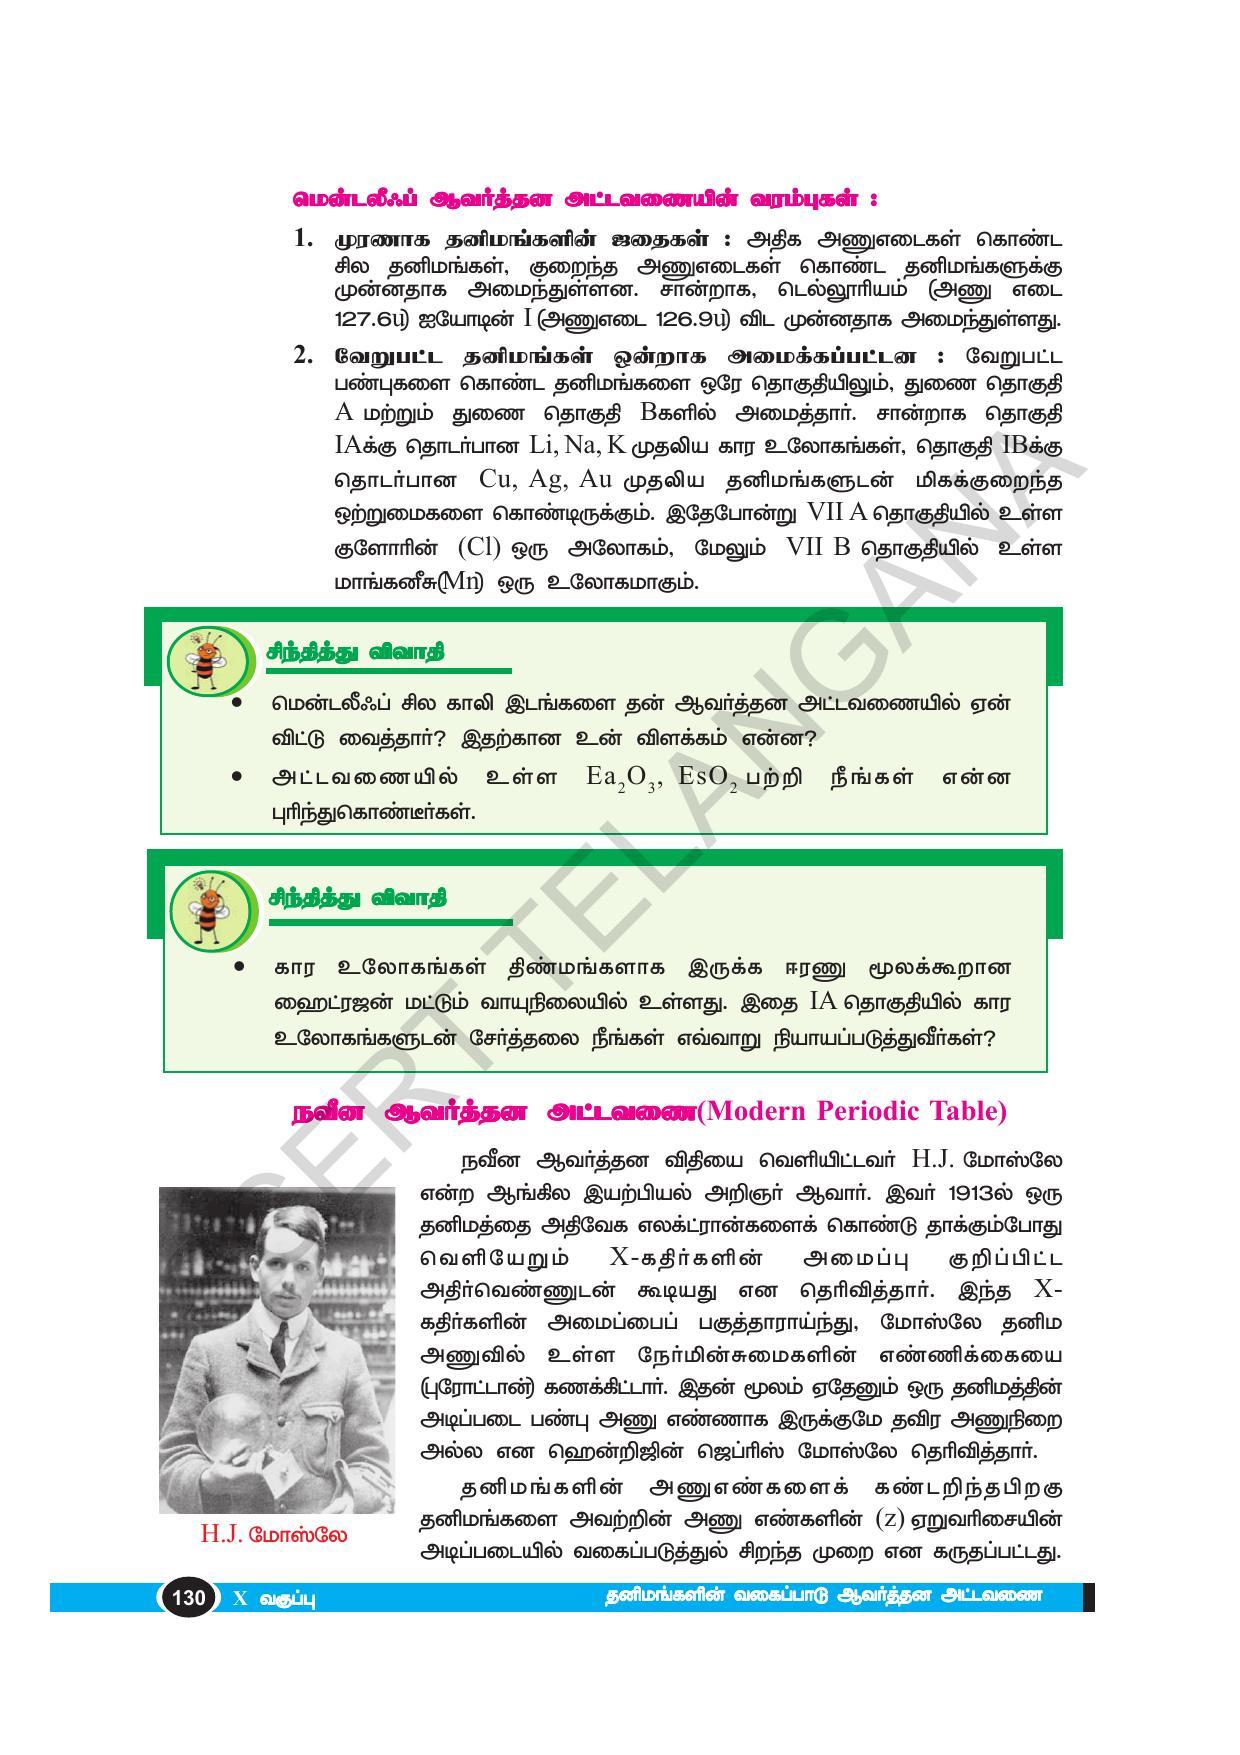 TS SCERT Class 10 Physical Science(Tamil Medium) Text Book - Page 142